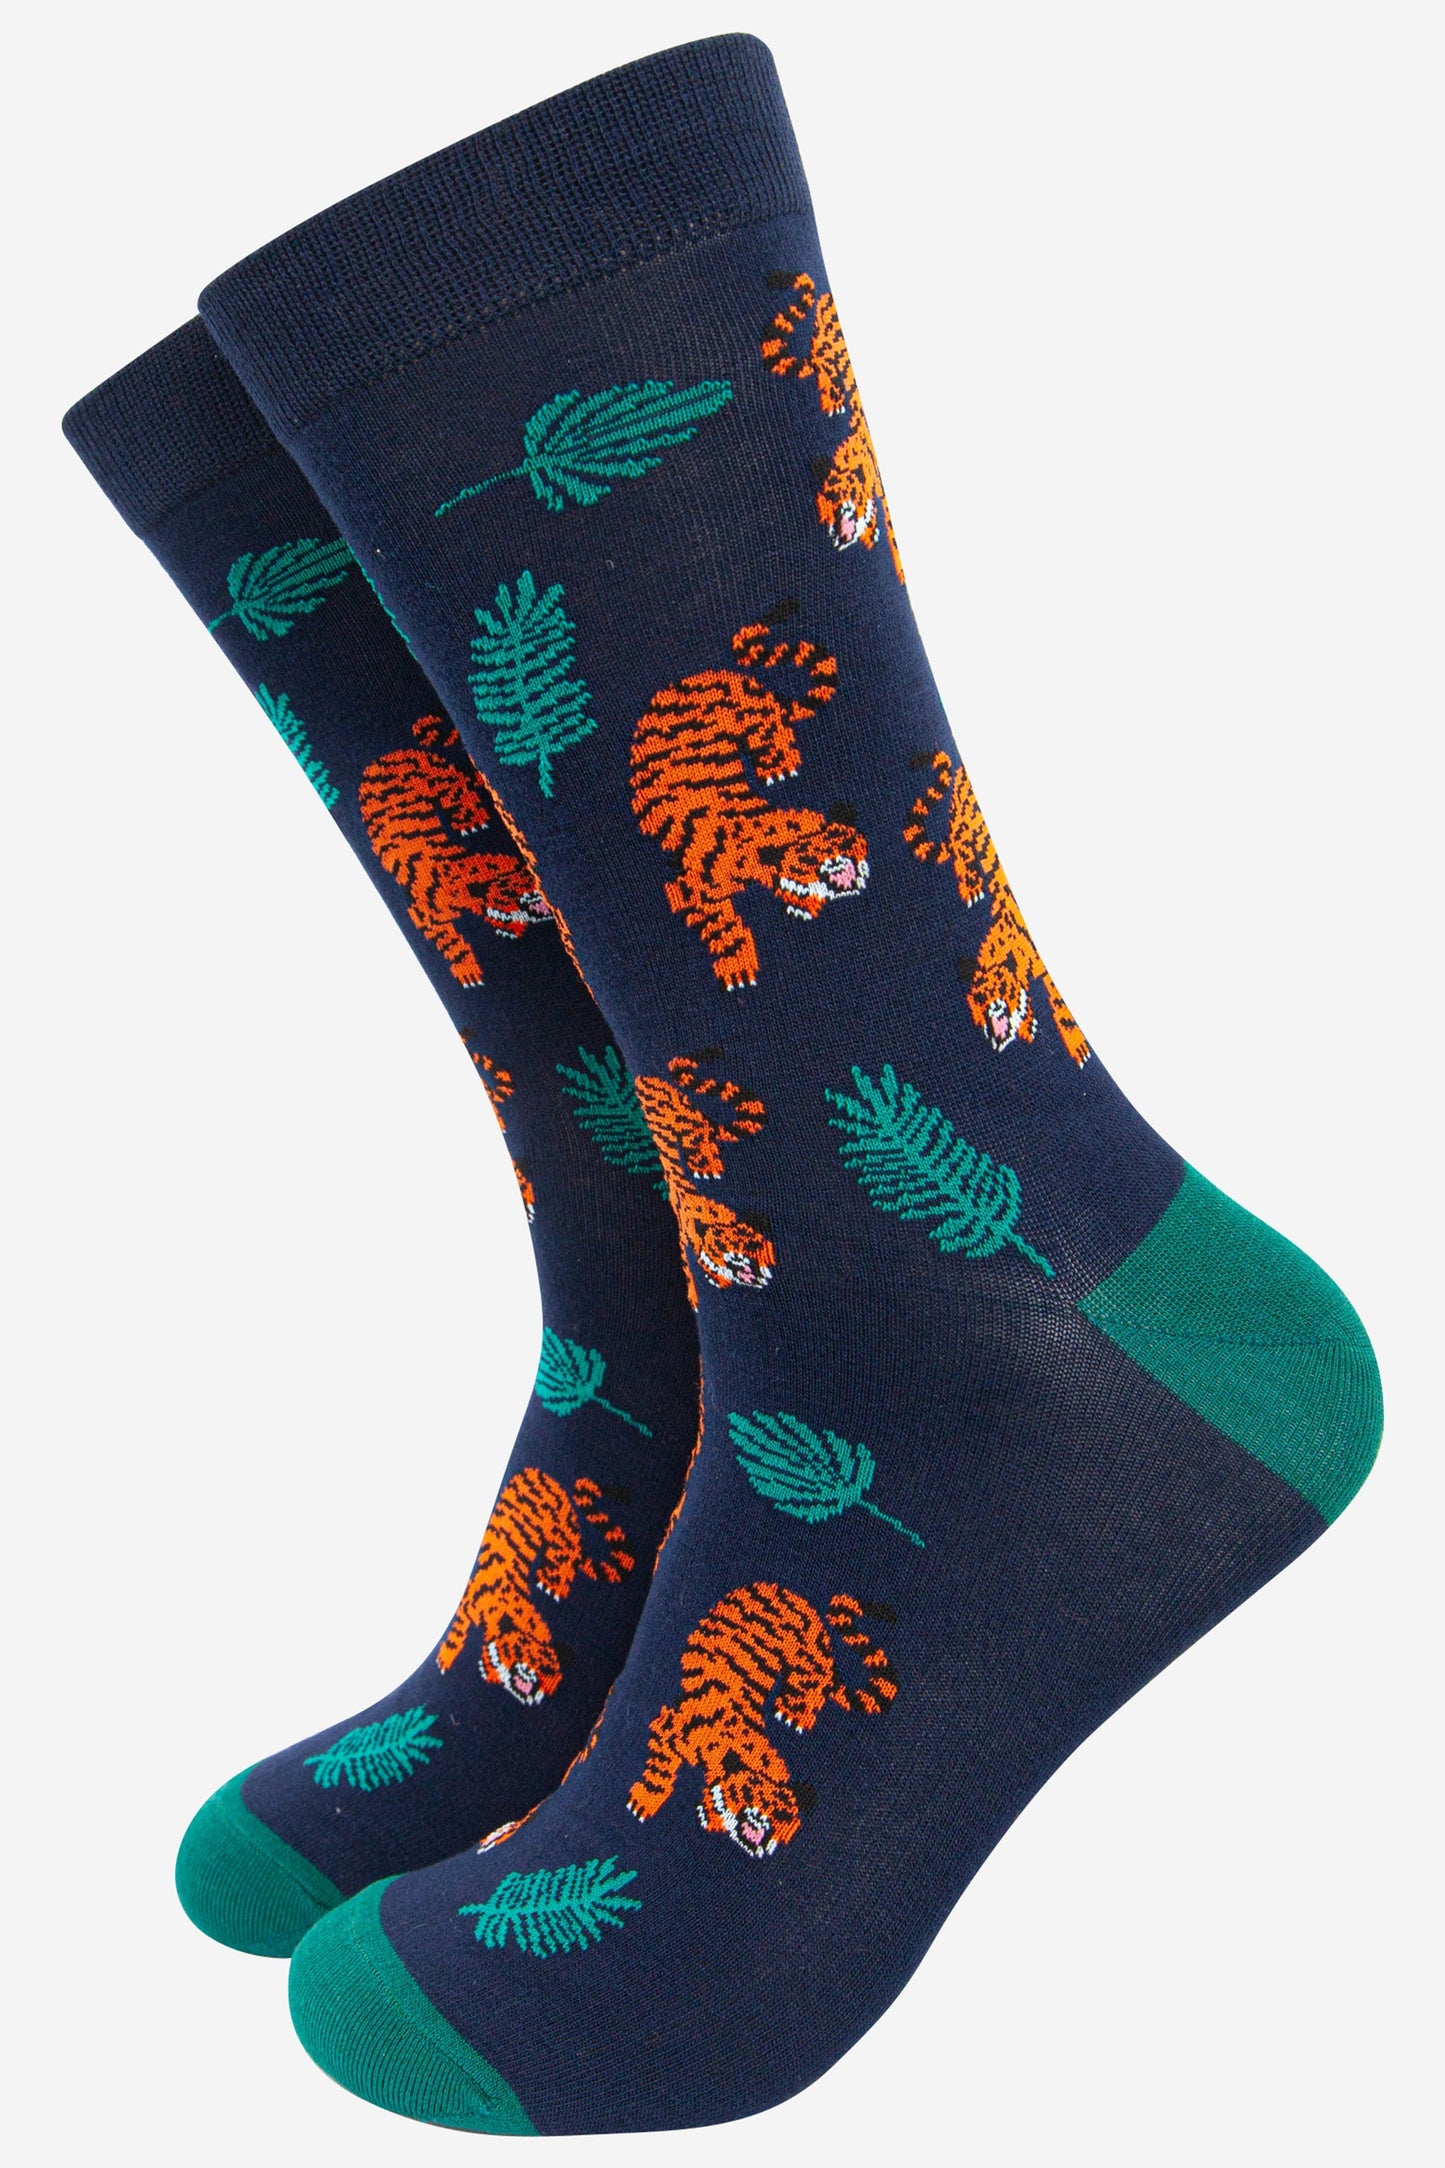 navy blue bamboo socks featuring an orange and black crouching tiger among jungle leaves